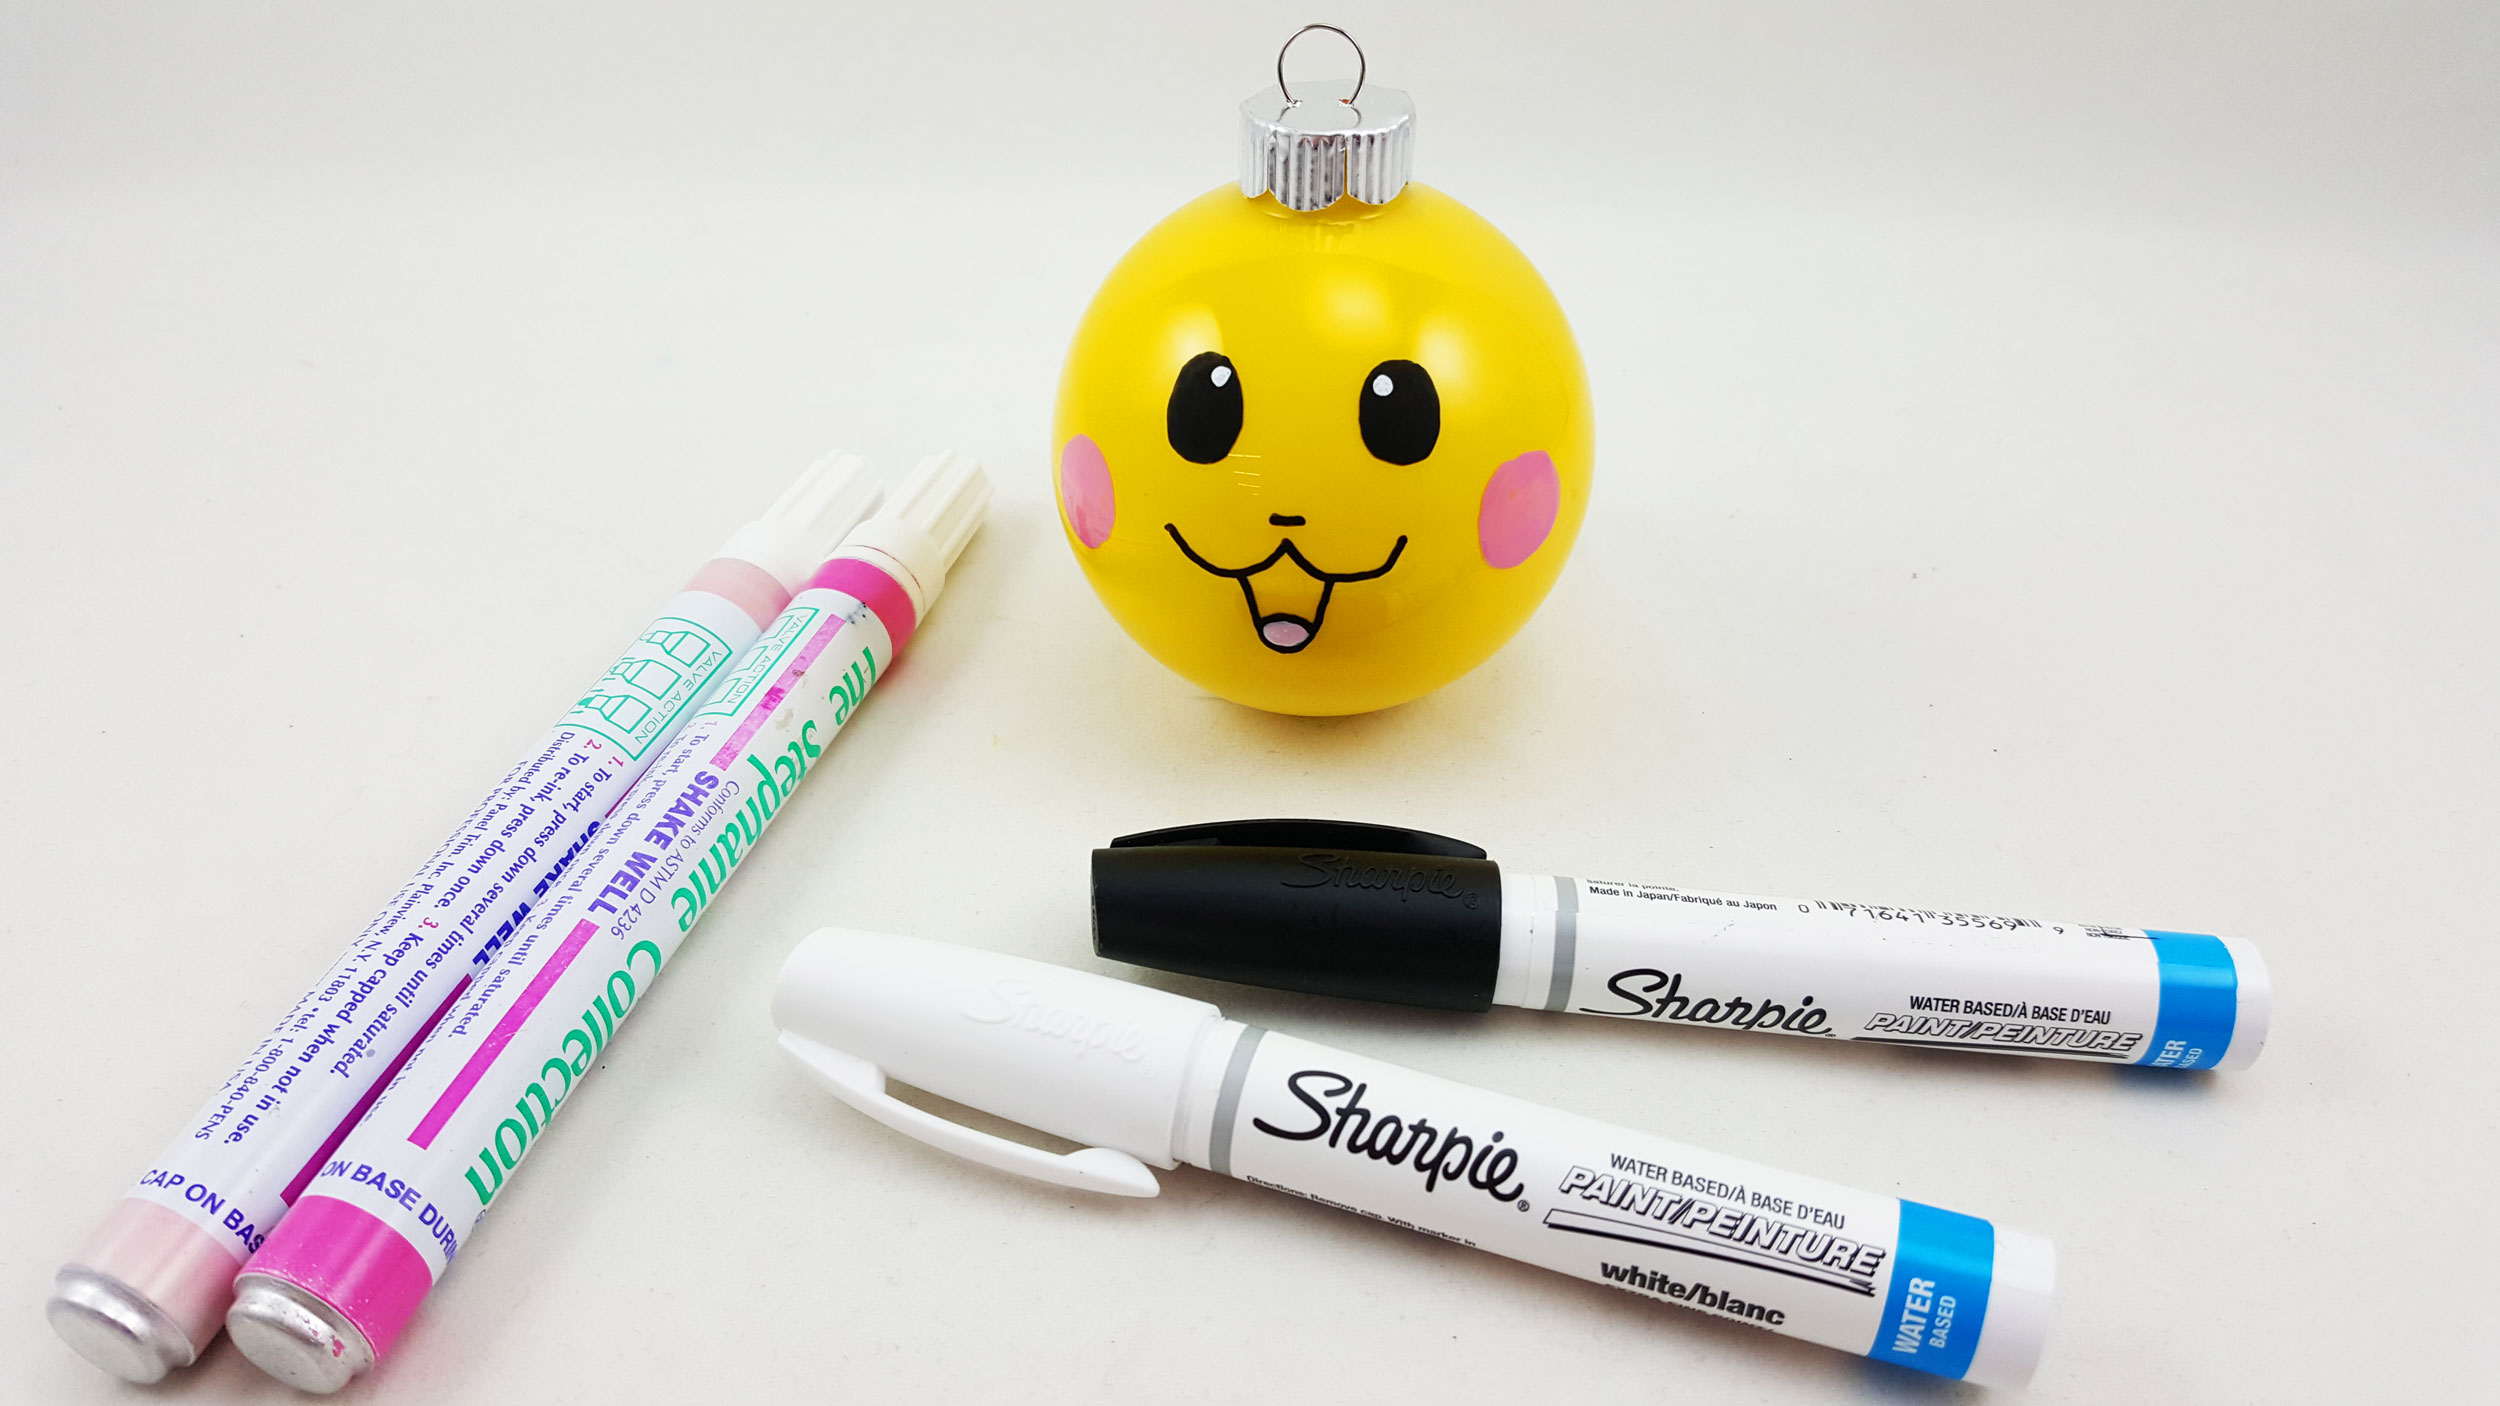 The third step to make a Pikachu ornament is to draw the face. Use how we drew the face as a guide, as the mouth is very important and uses a W shape with a U underneath. | OrnamentShop.com